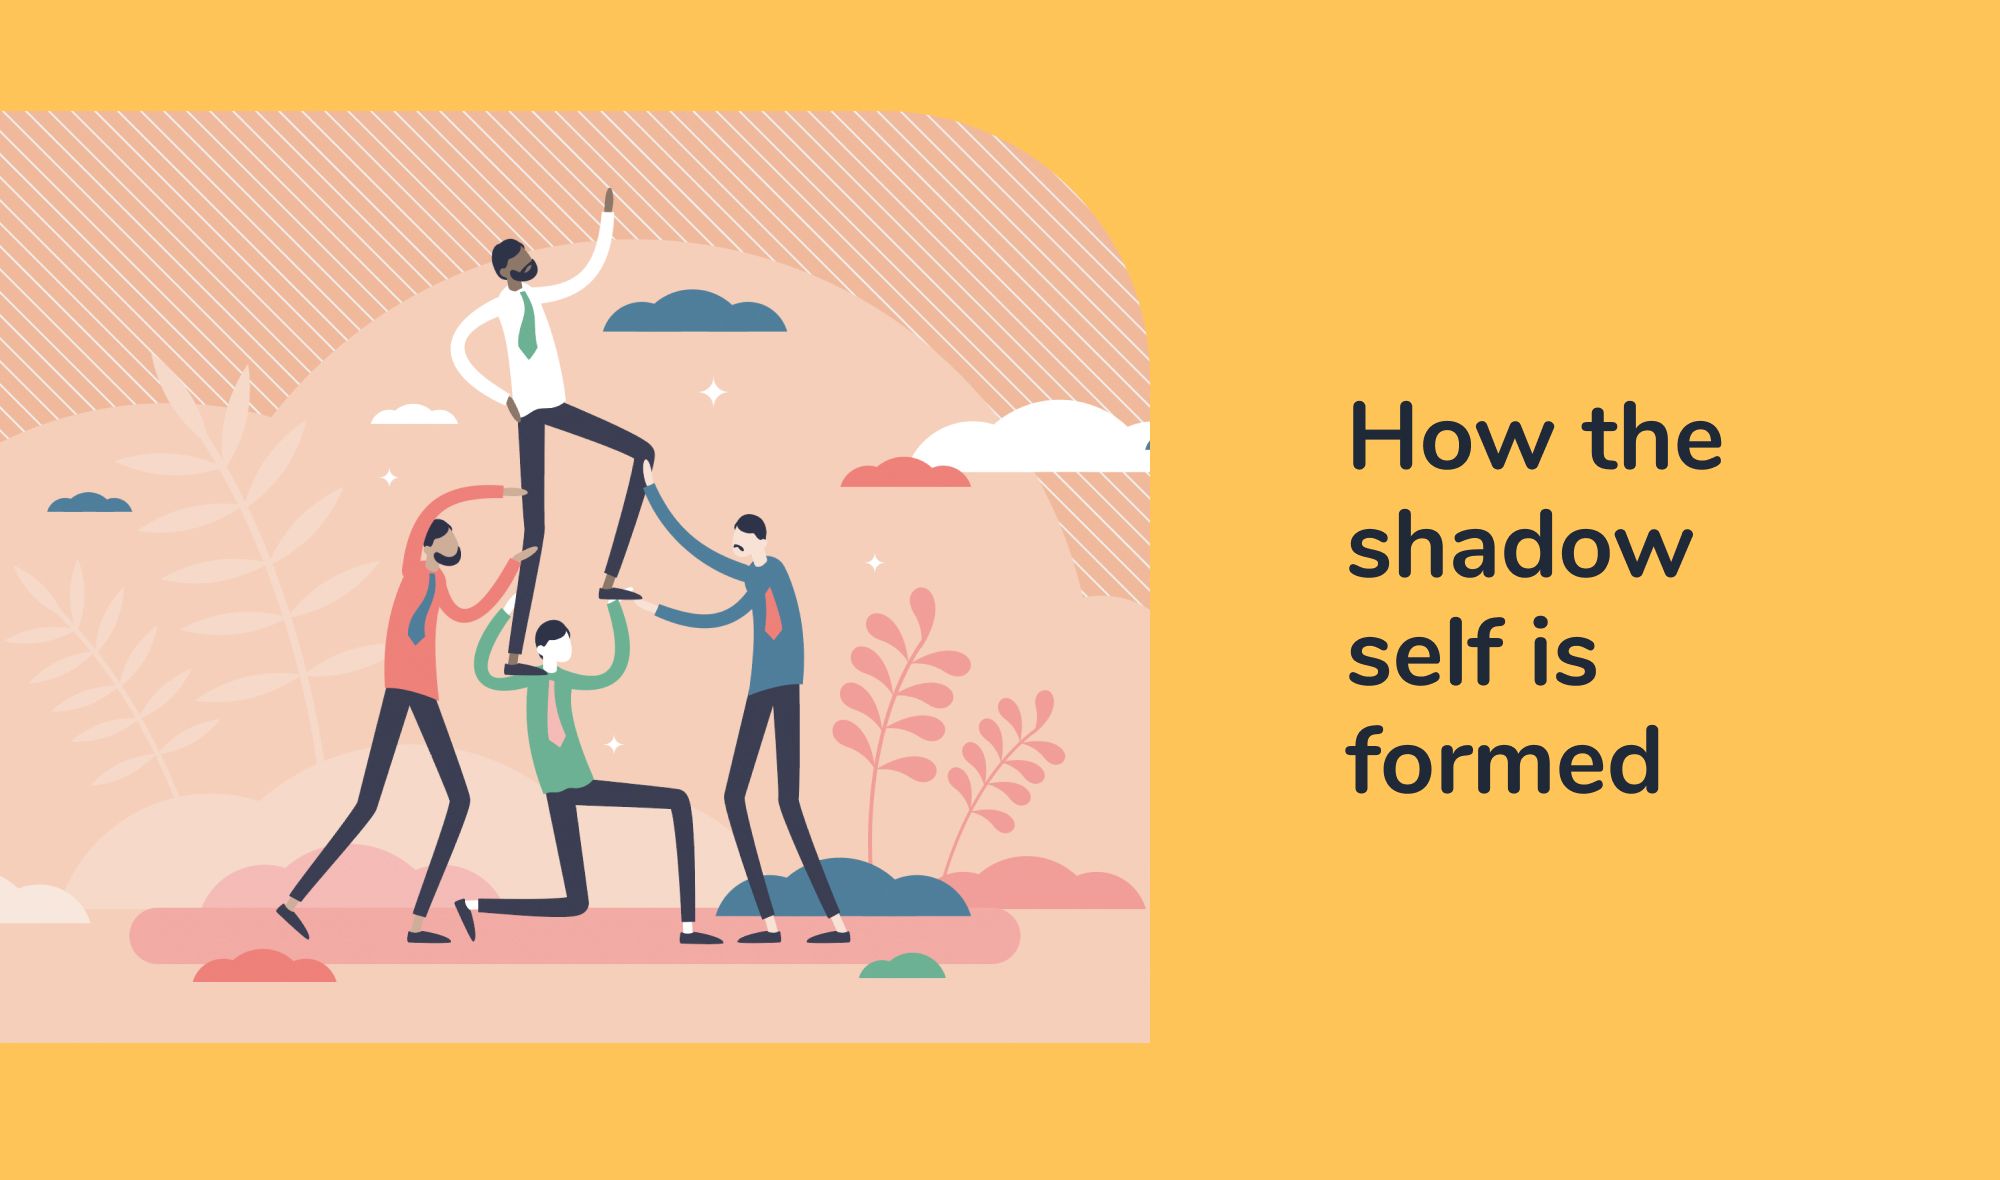 How the shadow self is formed